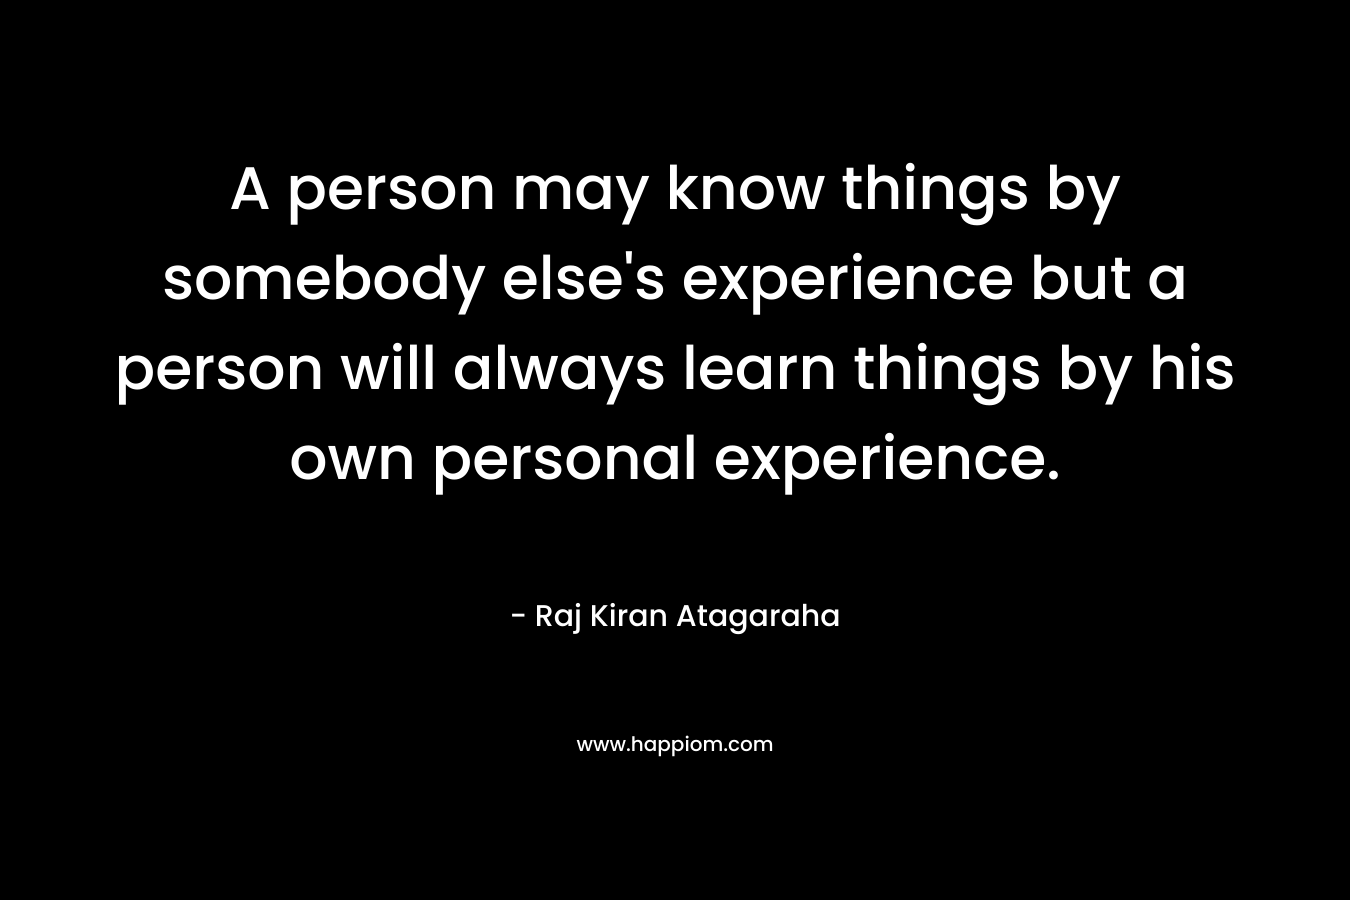 A person may know things by somebody else's experience but a person will always learn things by his own personal experience.